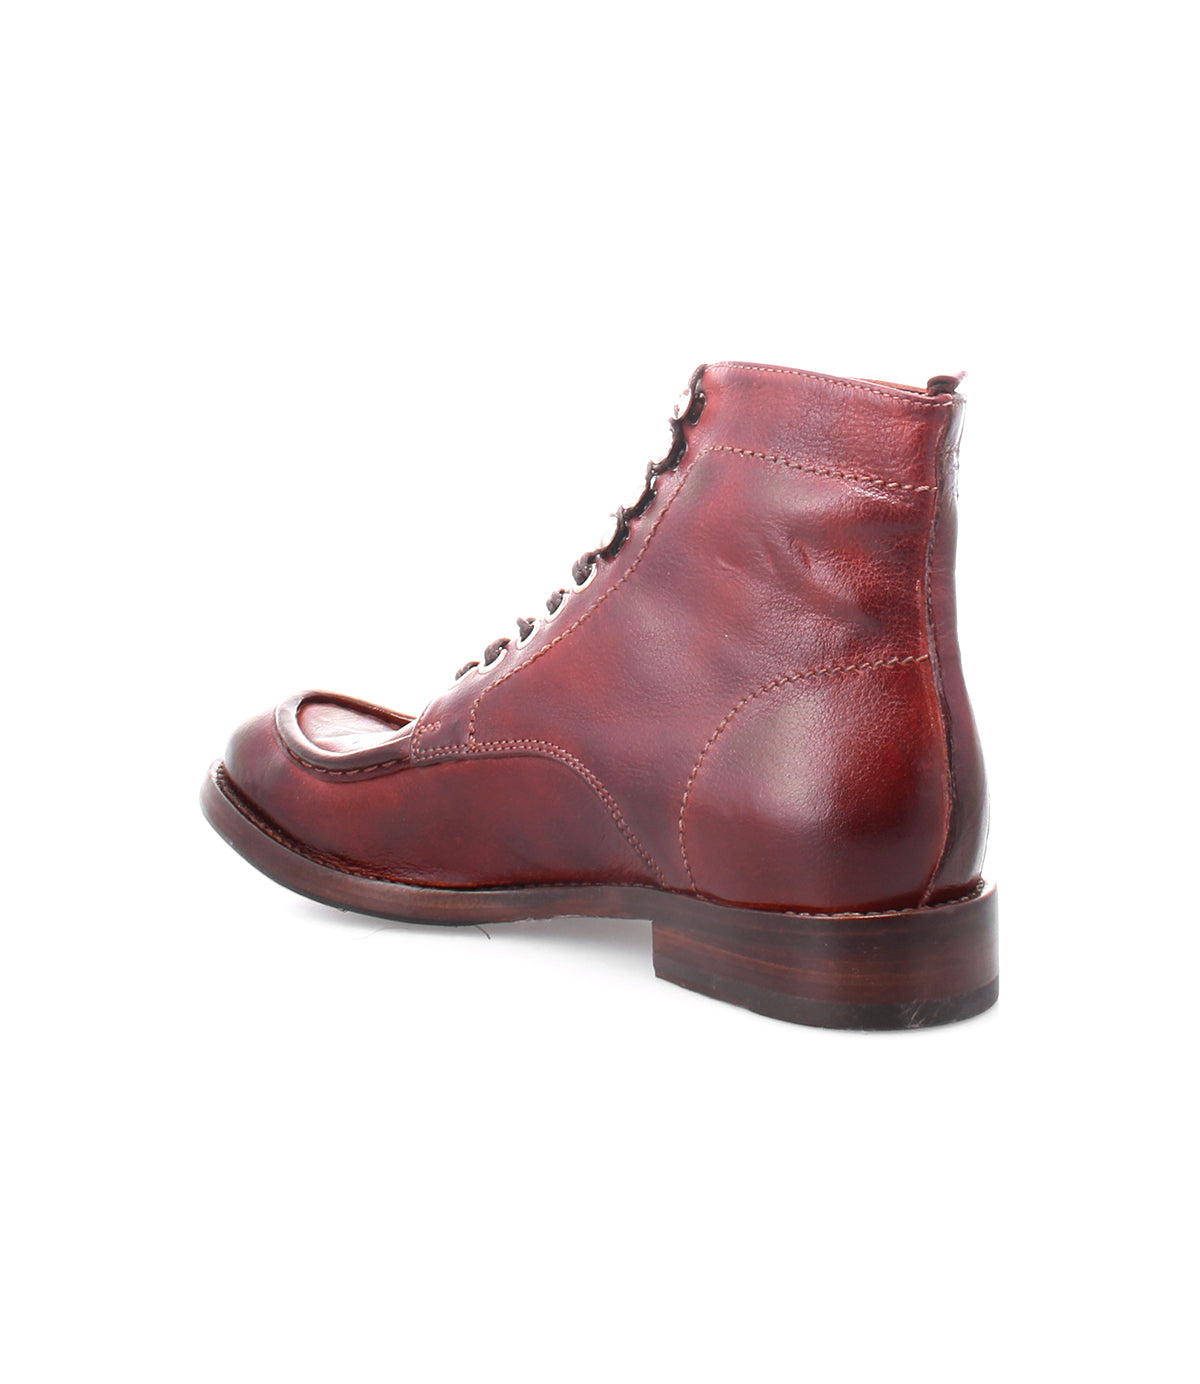 The Blimey men's leather boot by Bed Stu is shown on a white background.